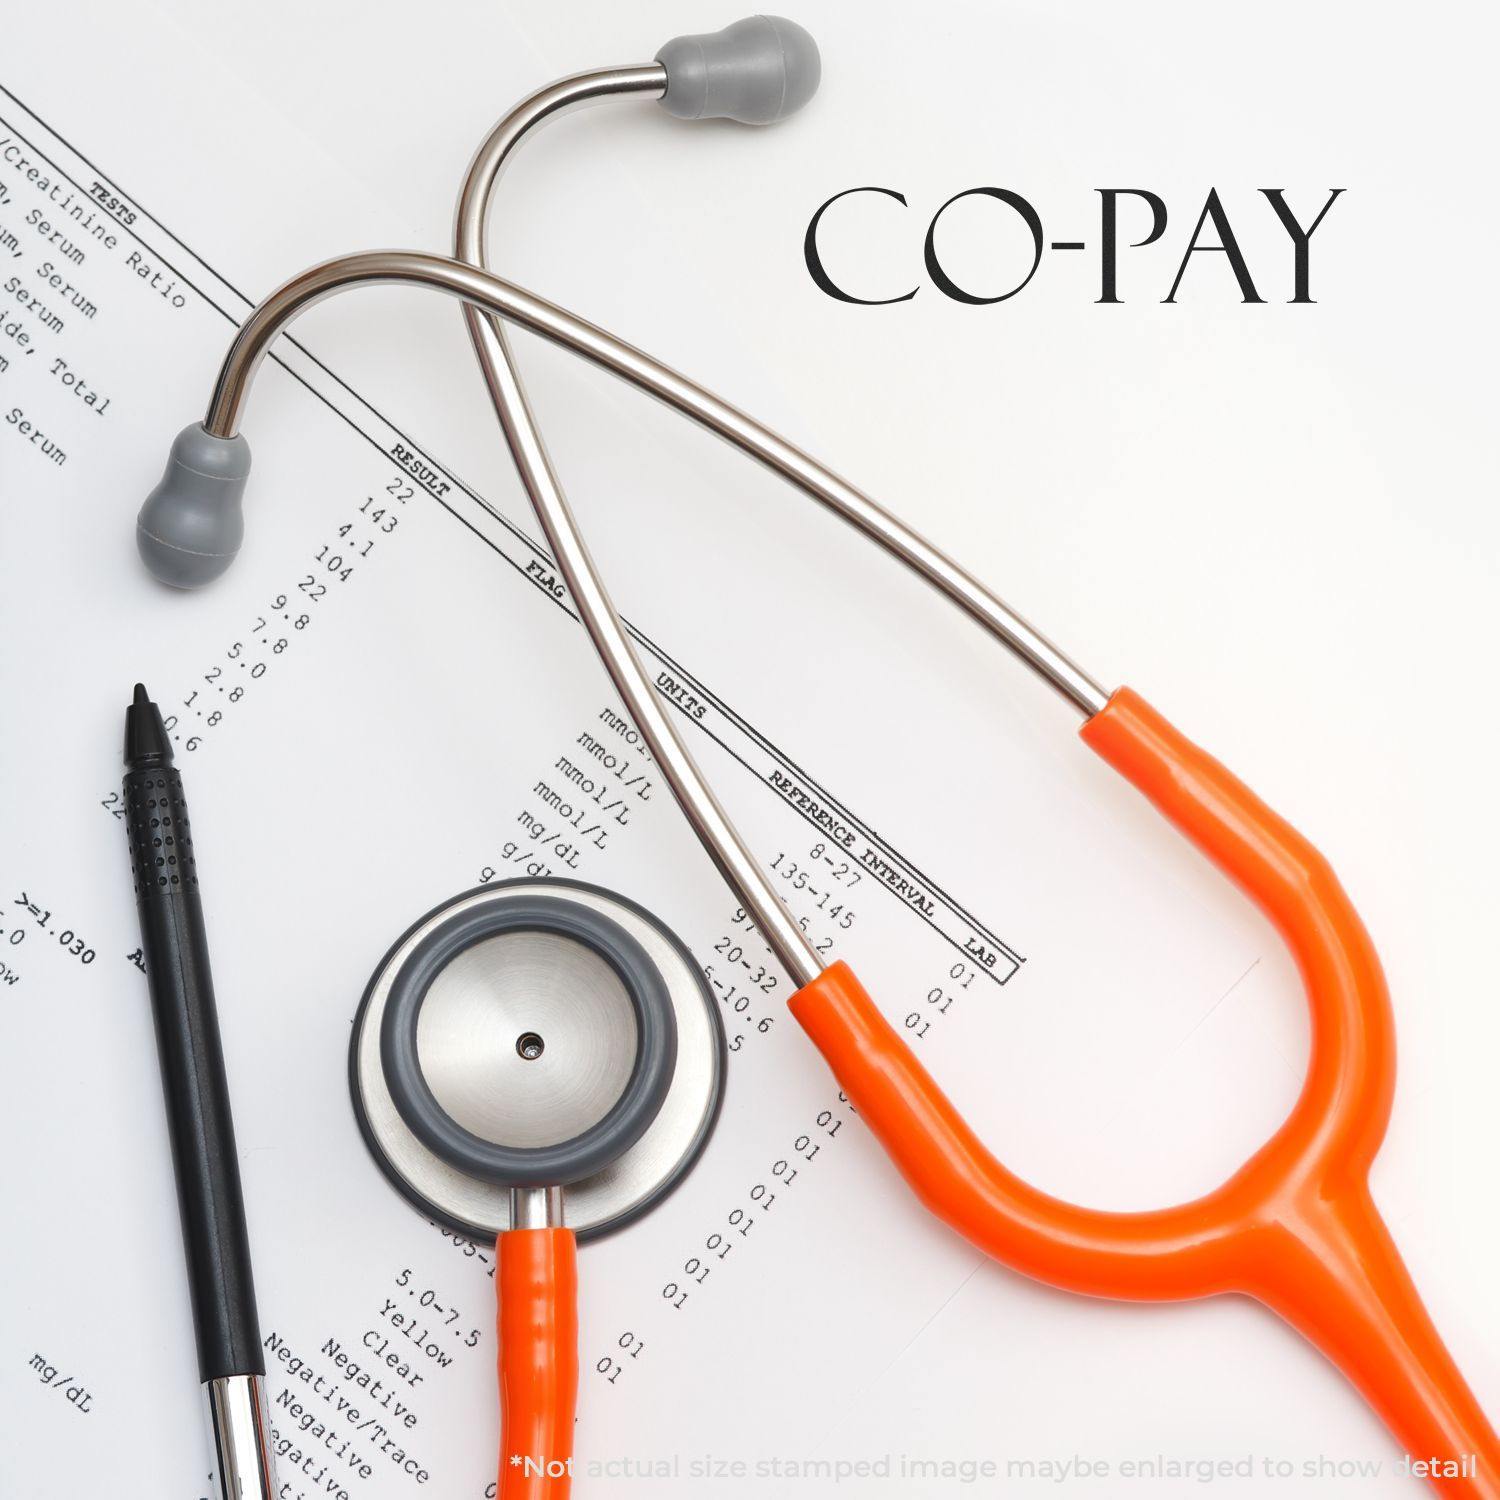 A stock office medical rubber stamp with a stamped image showing how the text "CO-PAY" is displayed after stamping.